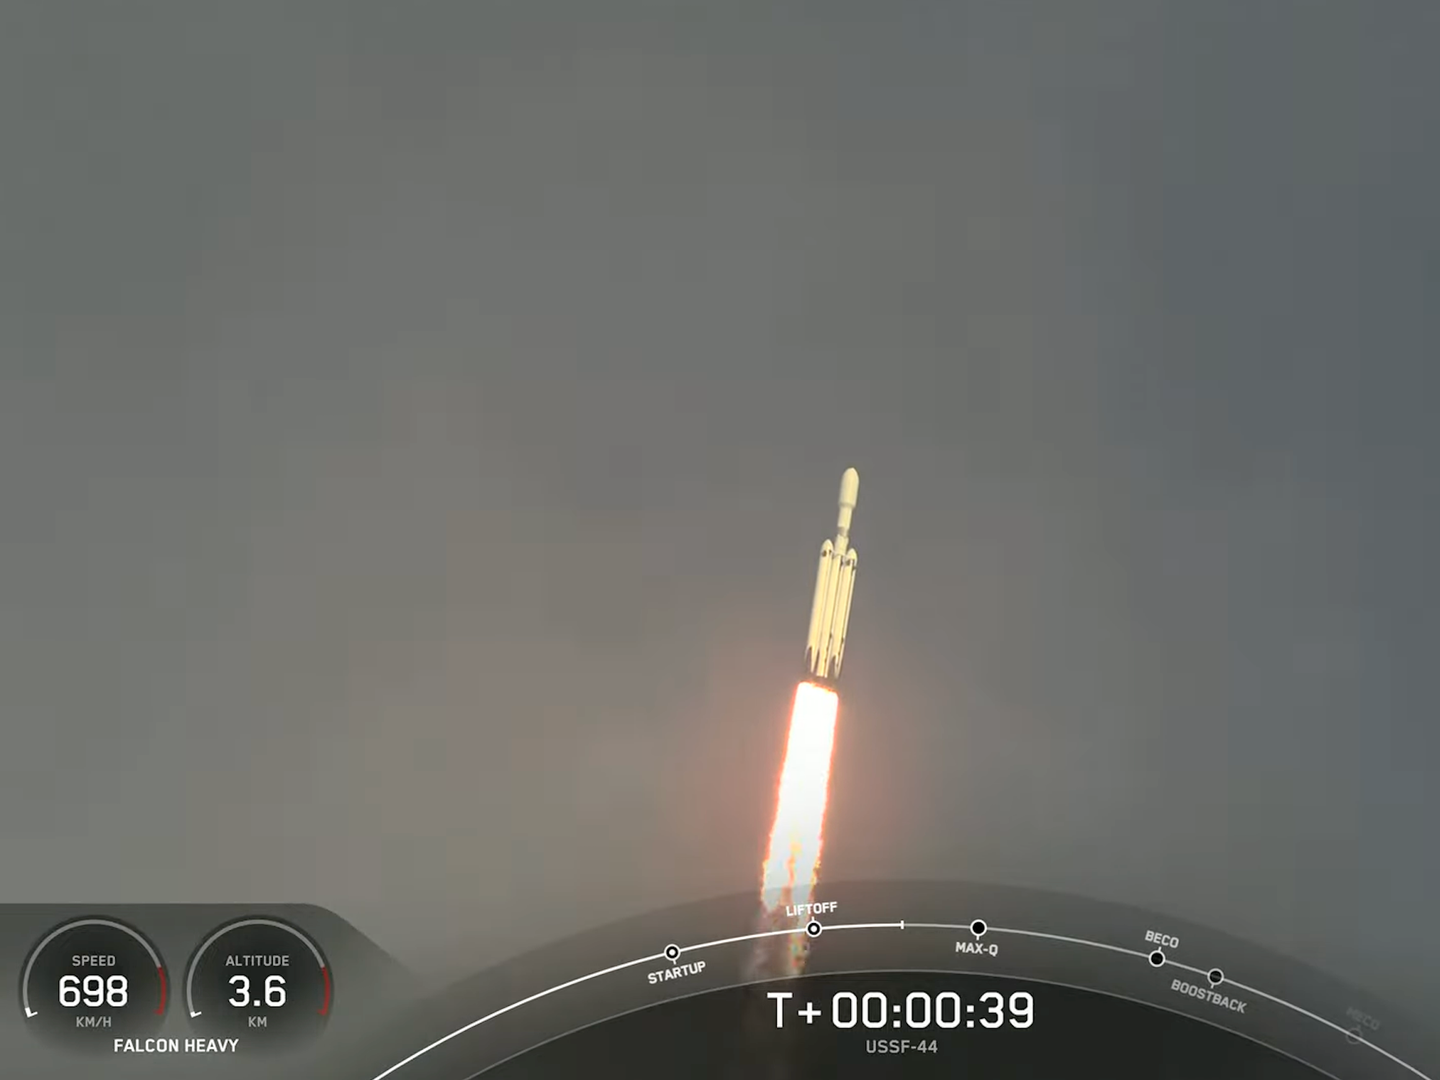 Falcon Heavy Space Force launch with timestamp, altitude, and speed readings.